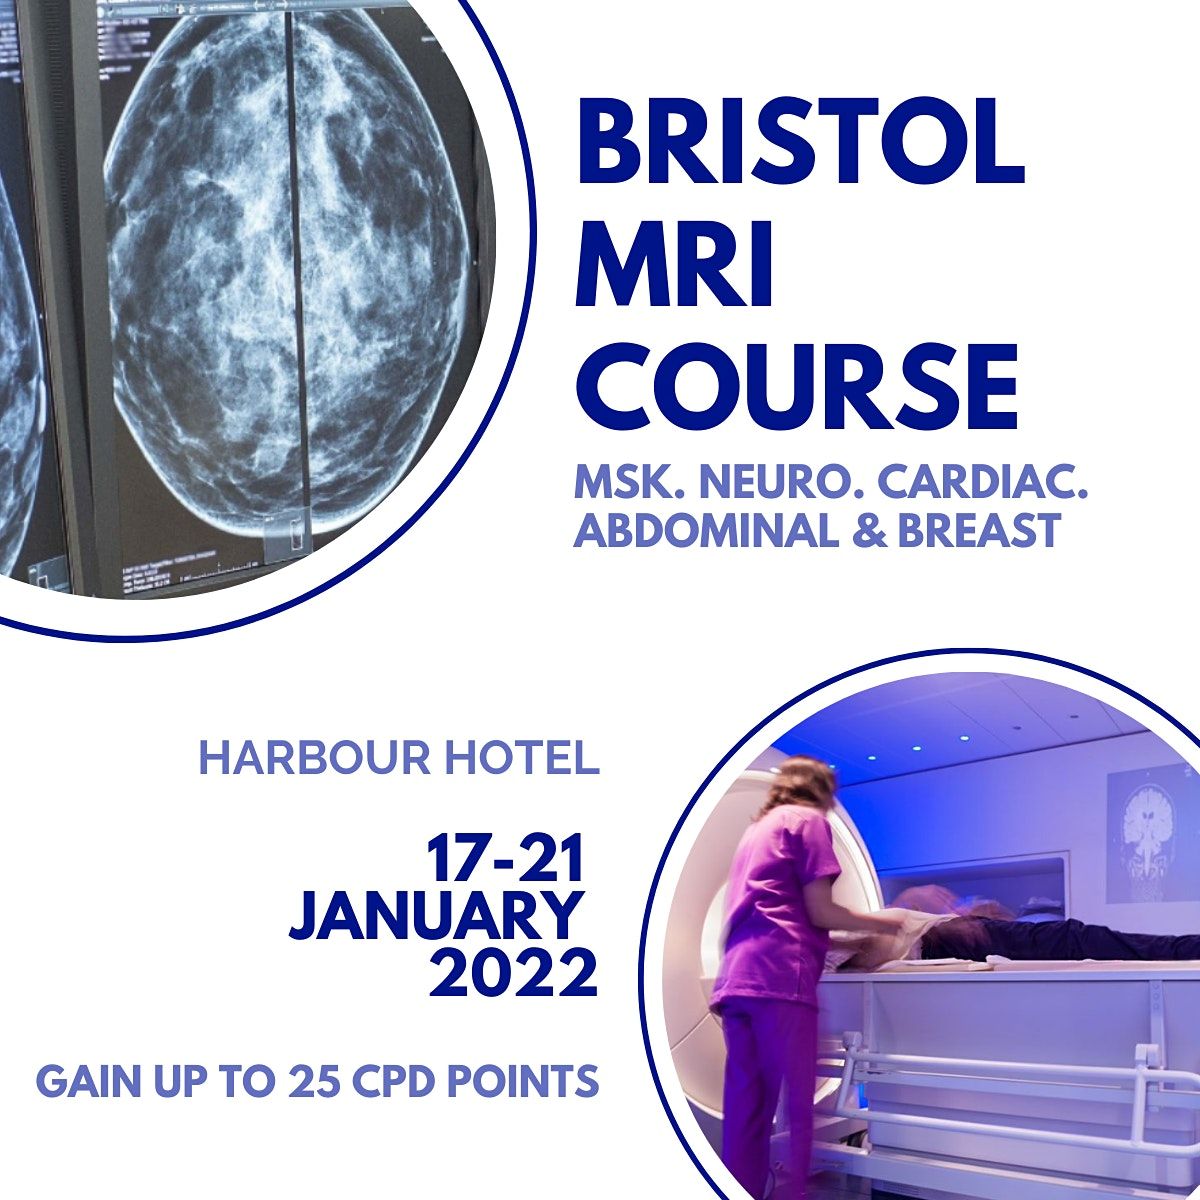 The Bristol MRI Course (For Radiologists and Radiographers)